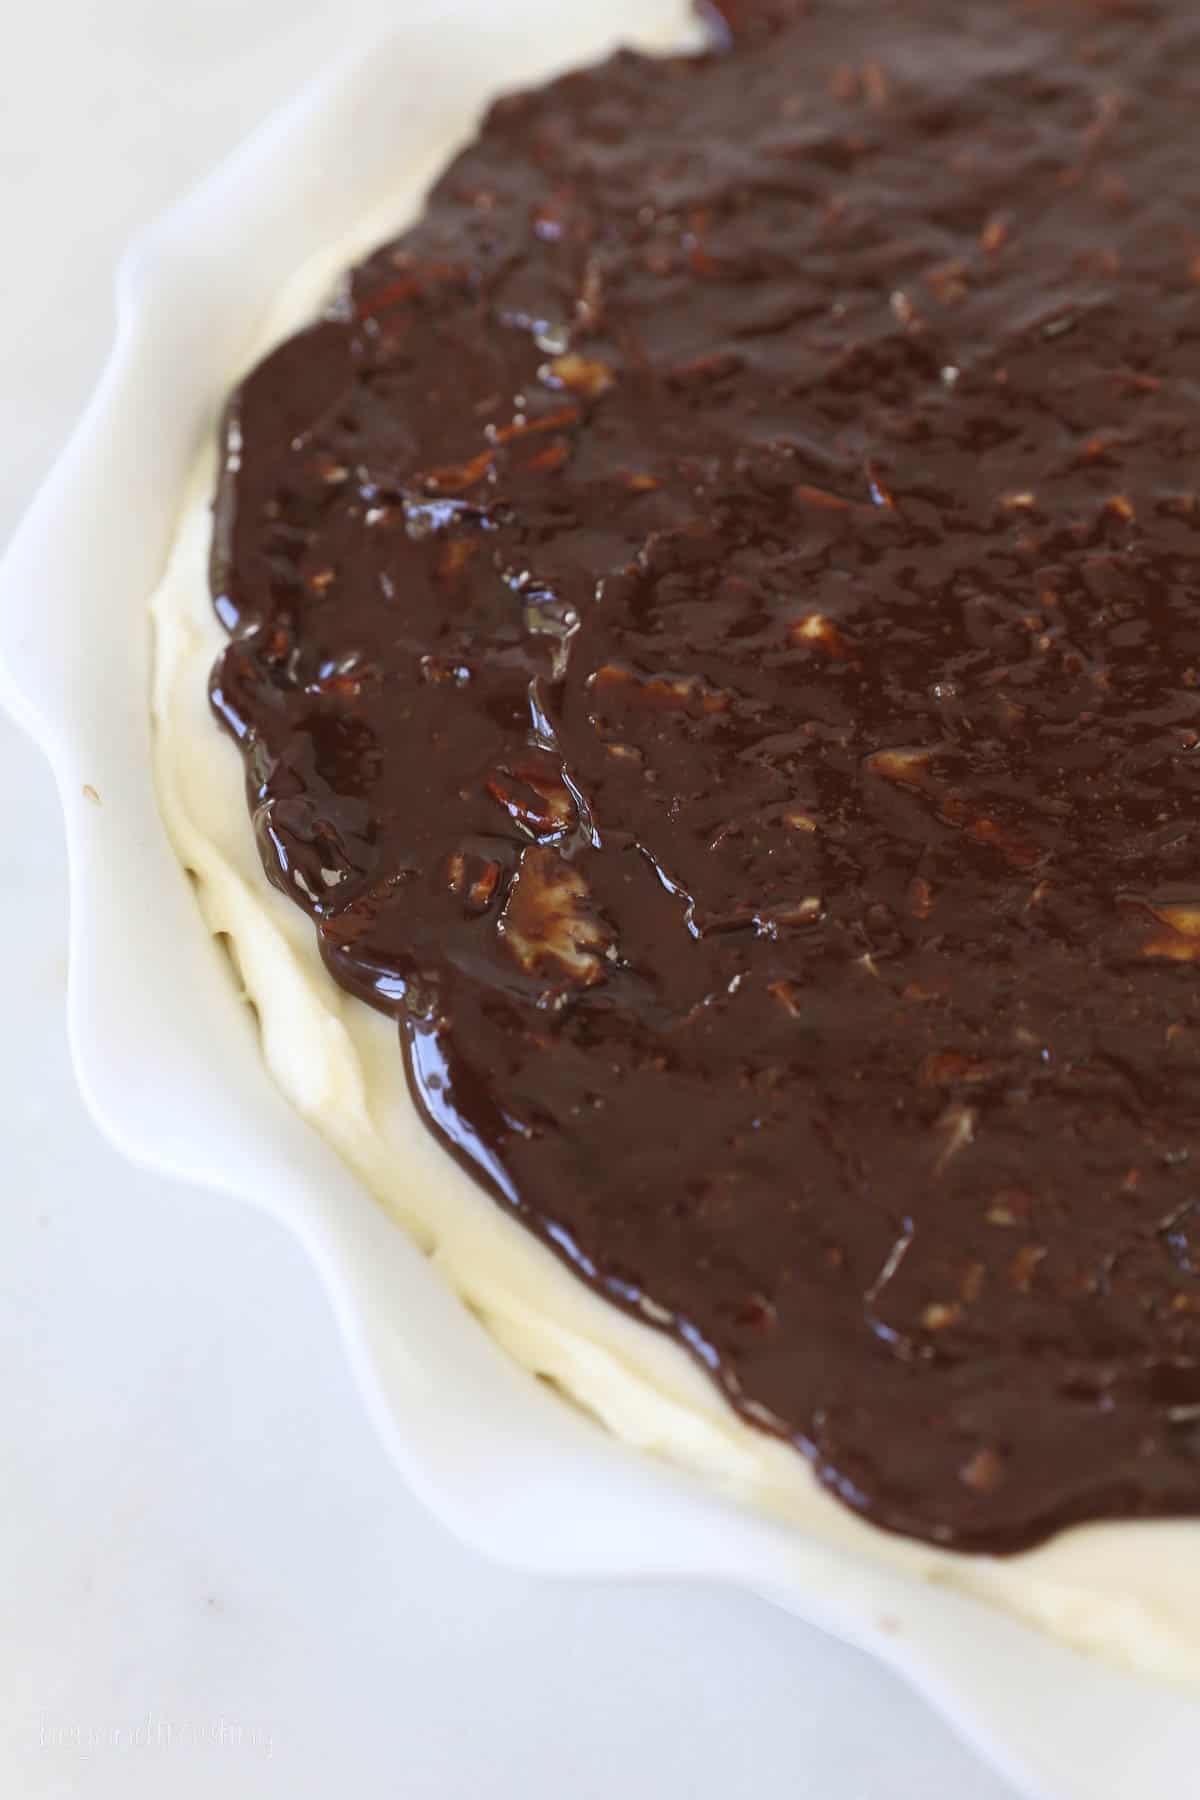 Chocolate ganache on top of cheesecake filling